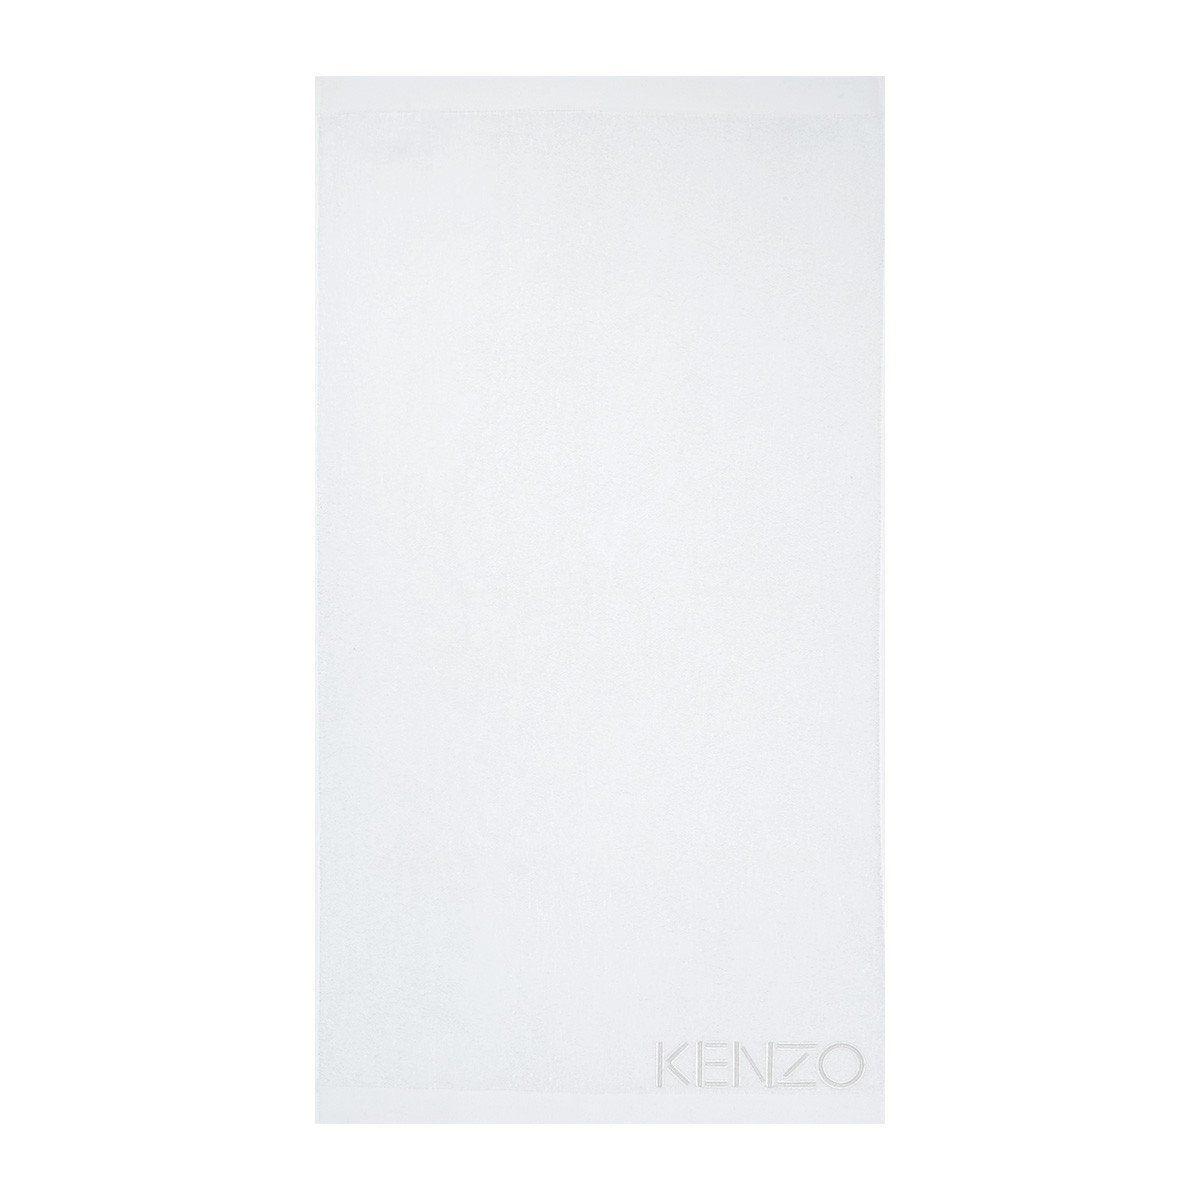 Iconic White Guest Towels by Kenzo | Fig Linens